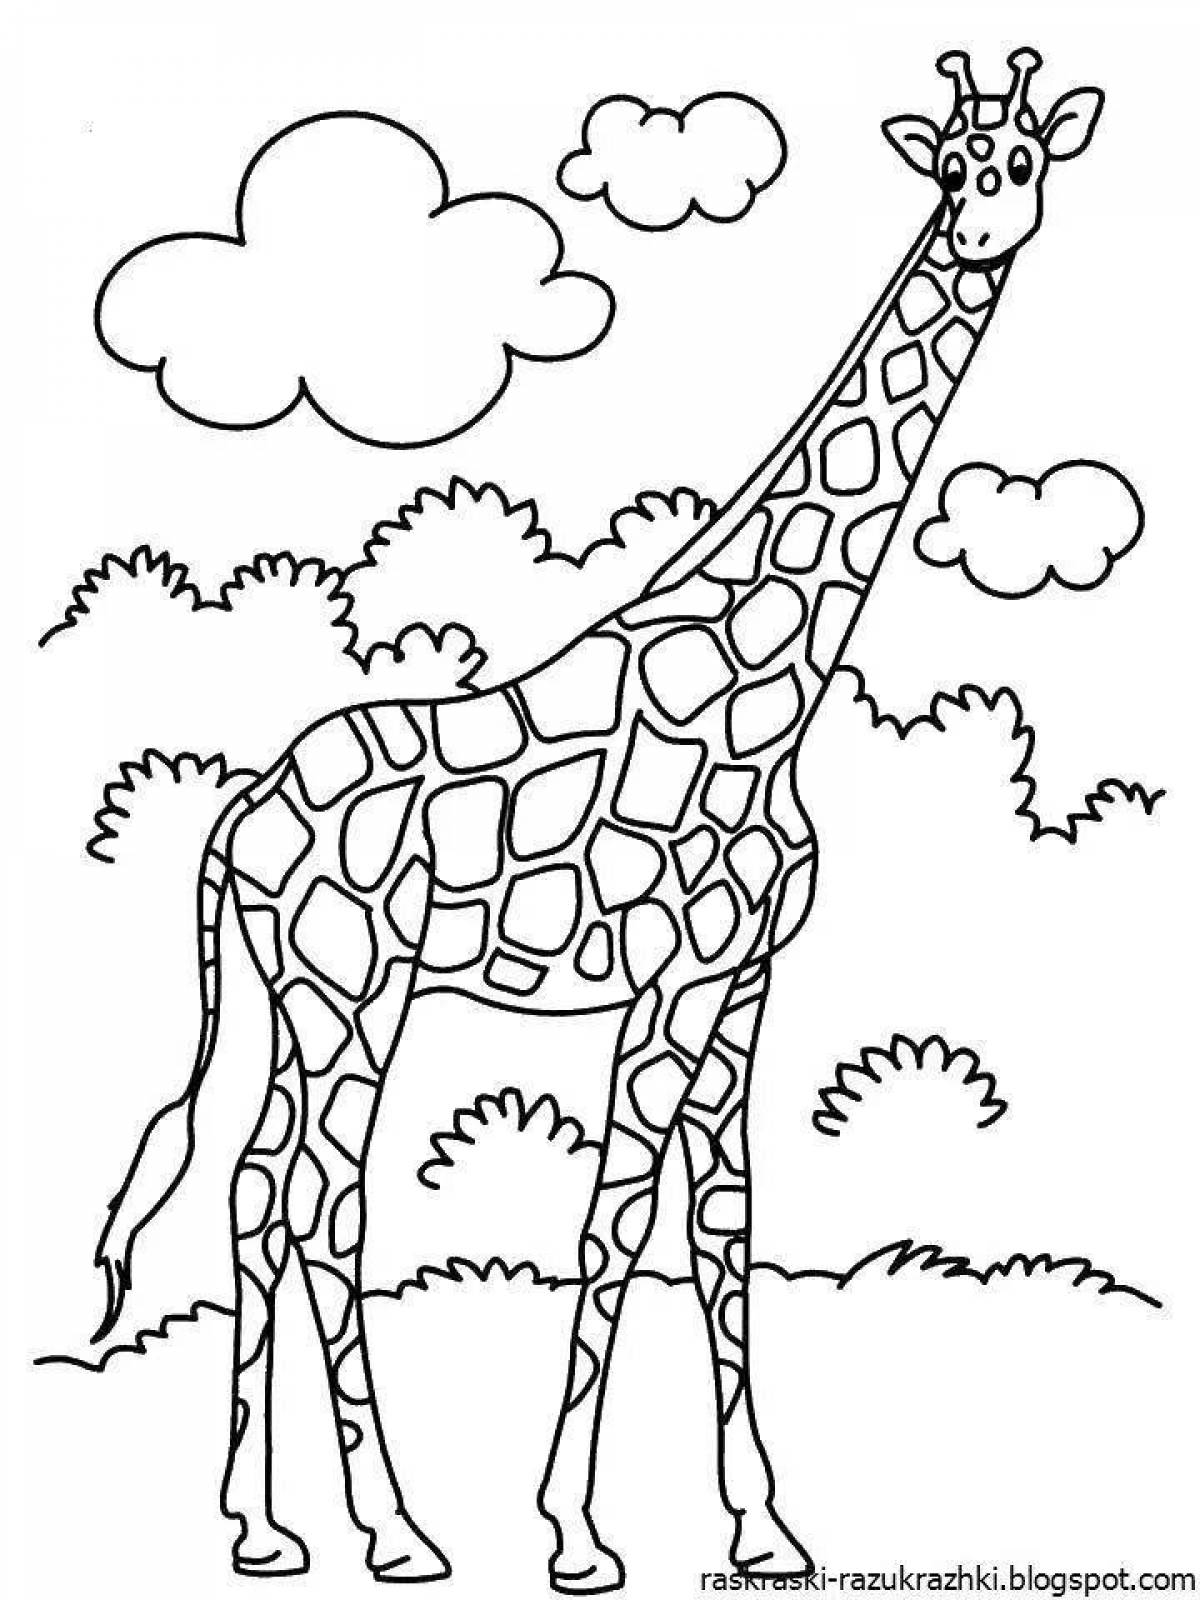 Exciting African animal coloring book for 6-7 year olds